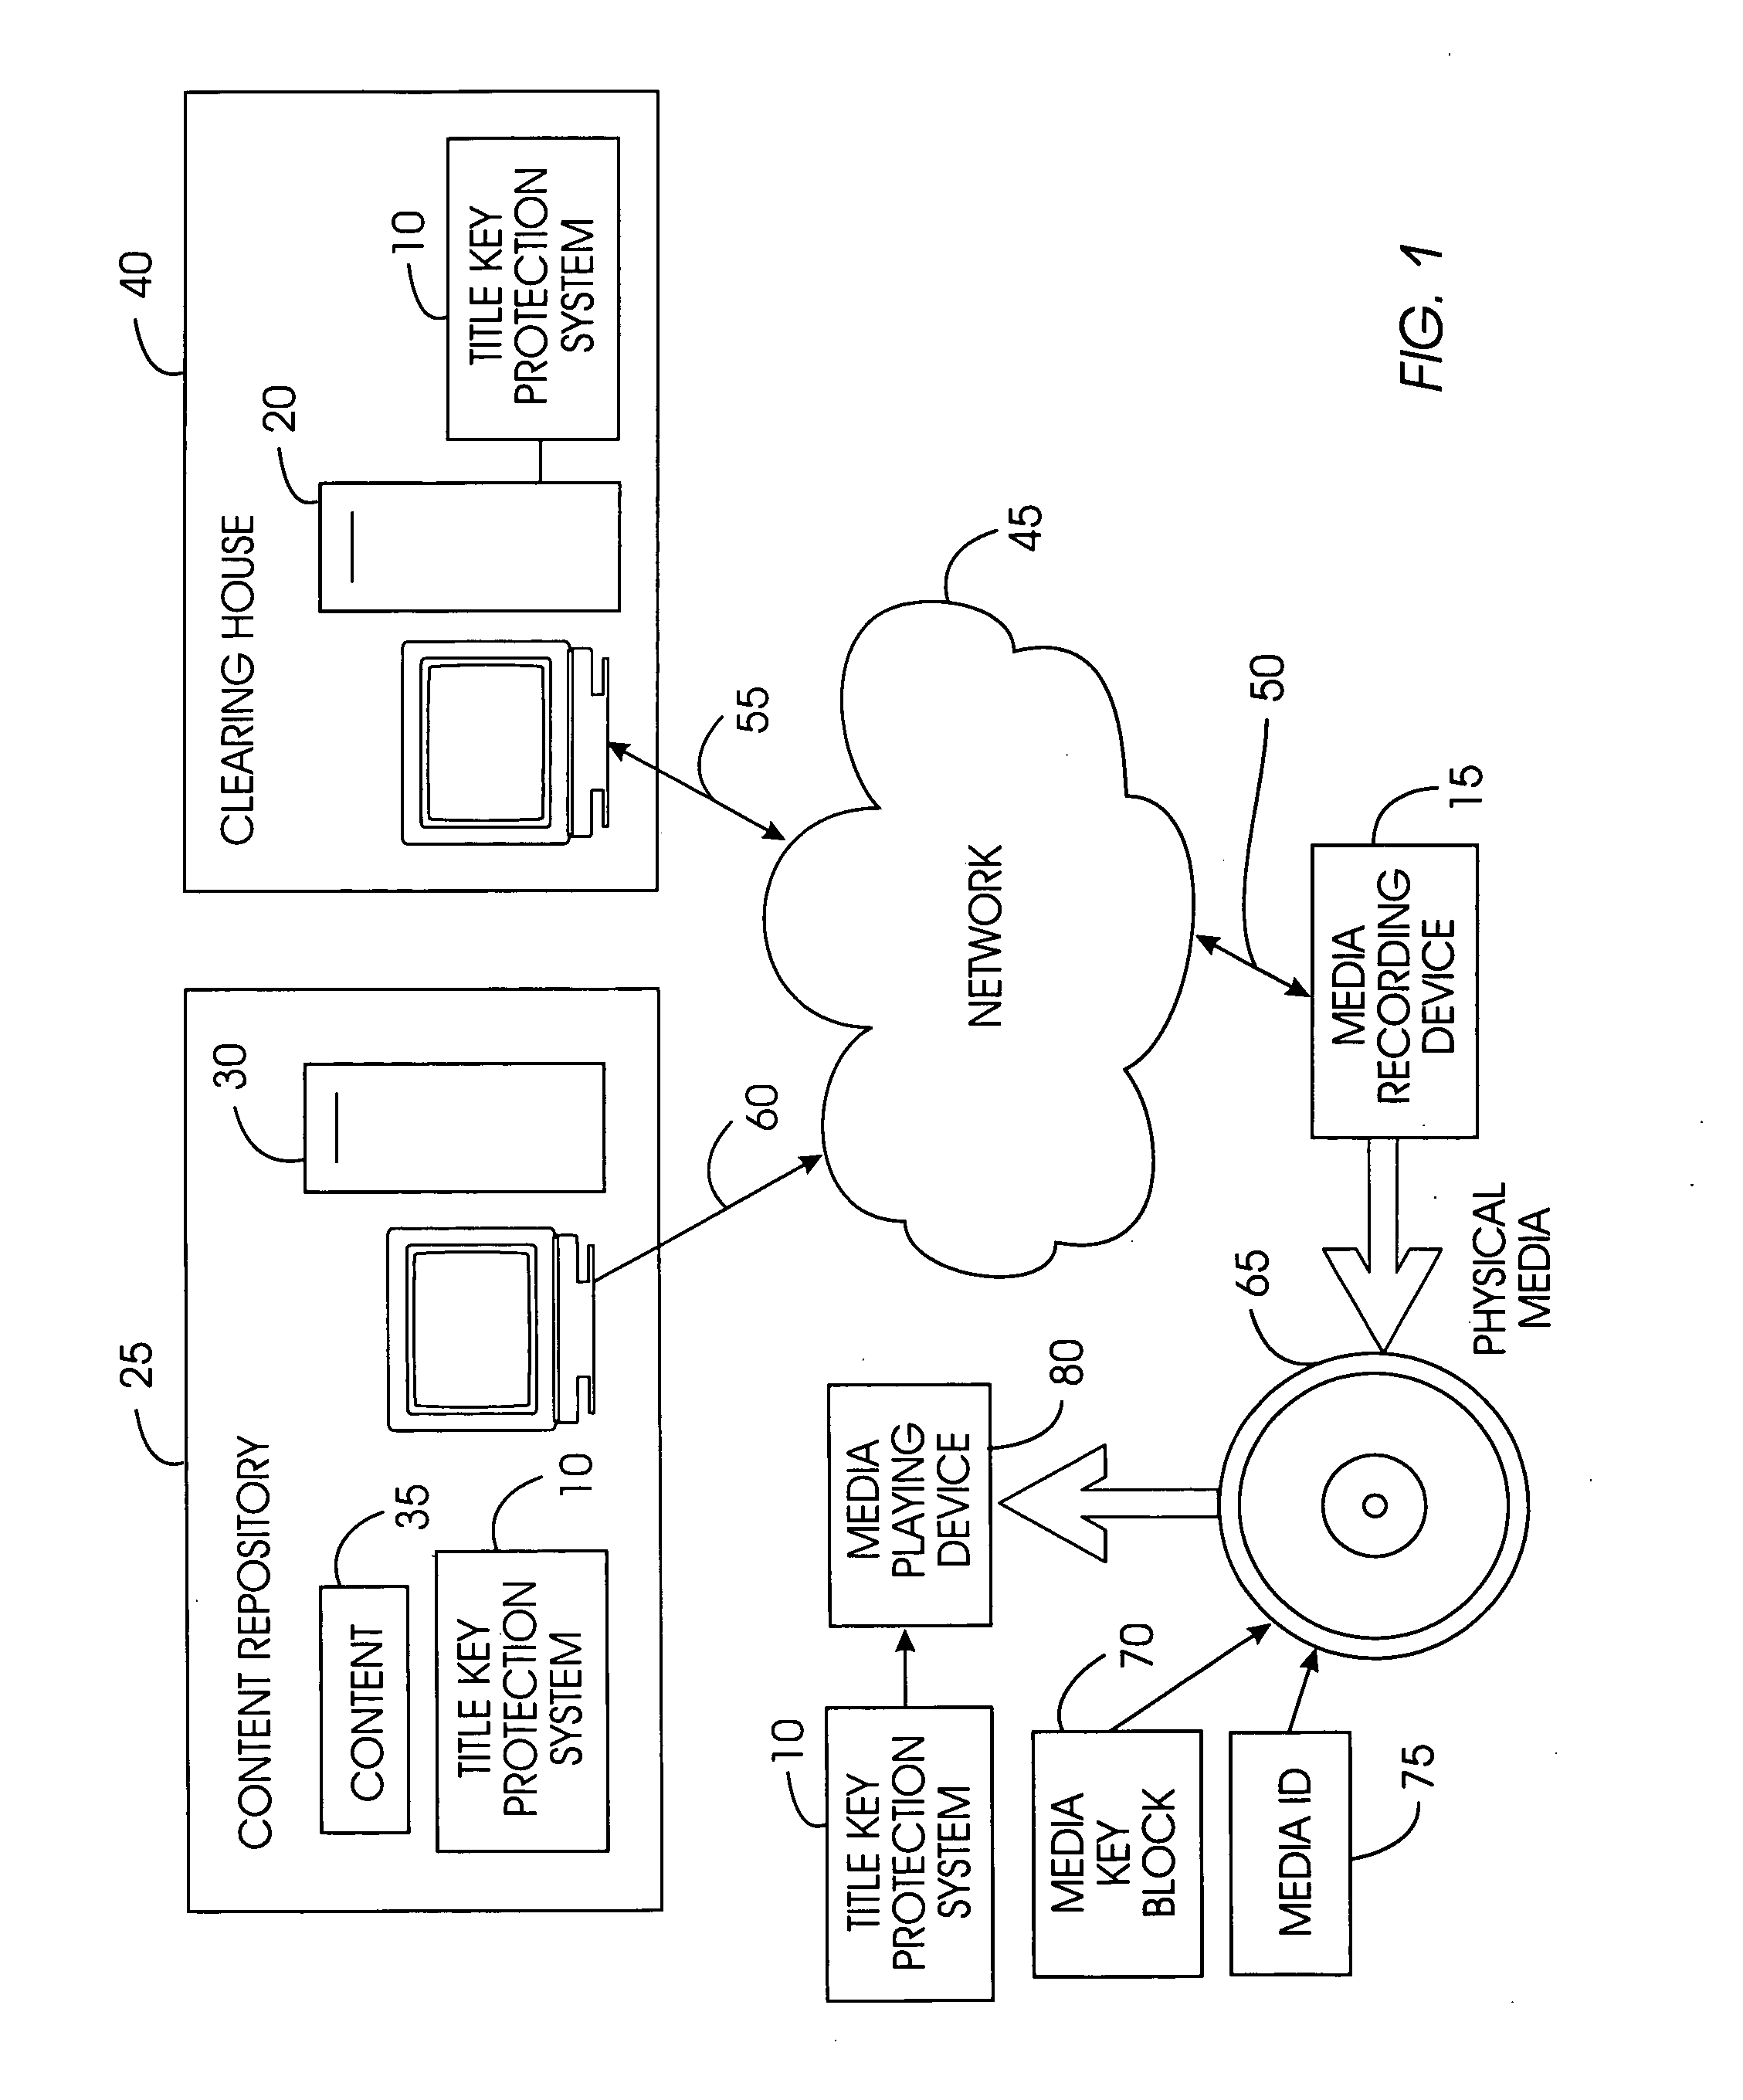 System and method for protecting a title key in a secure distribution system for recordable media content